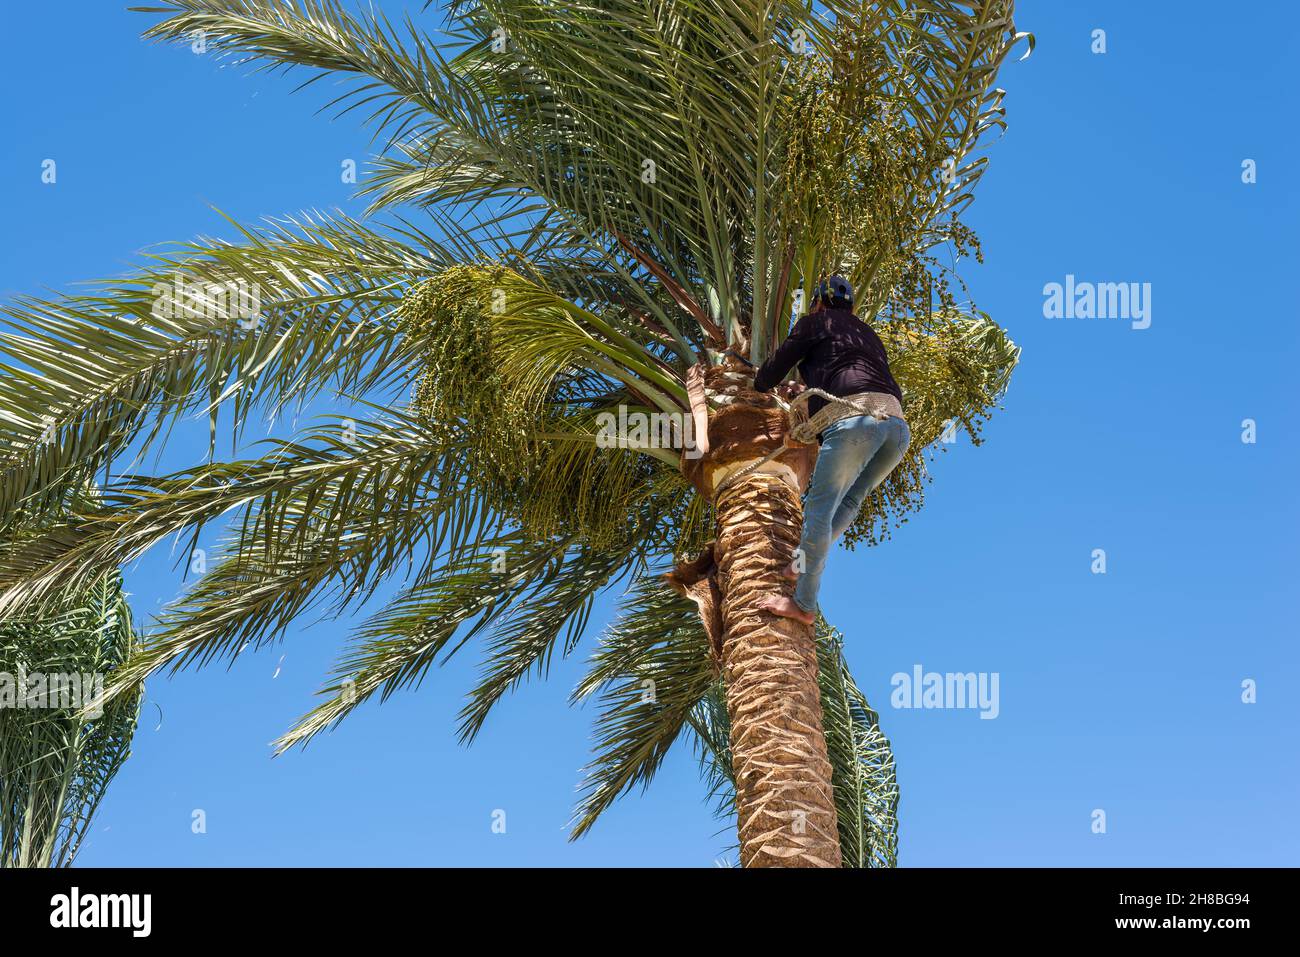 https://c8.alamy.com/comp/2H8BG94/man-working-at-the-top-of-a-palm-tree-pruning-the-leaves-helping-himself-with-a-well-used-rope-cleaning-and-cutting-palm-trees-dangerous-job-2H8BG94.jpg